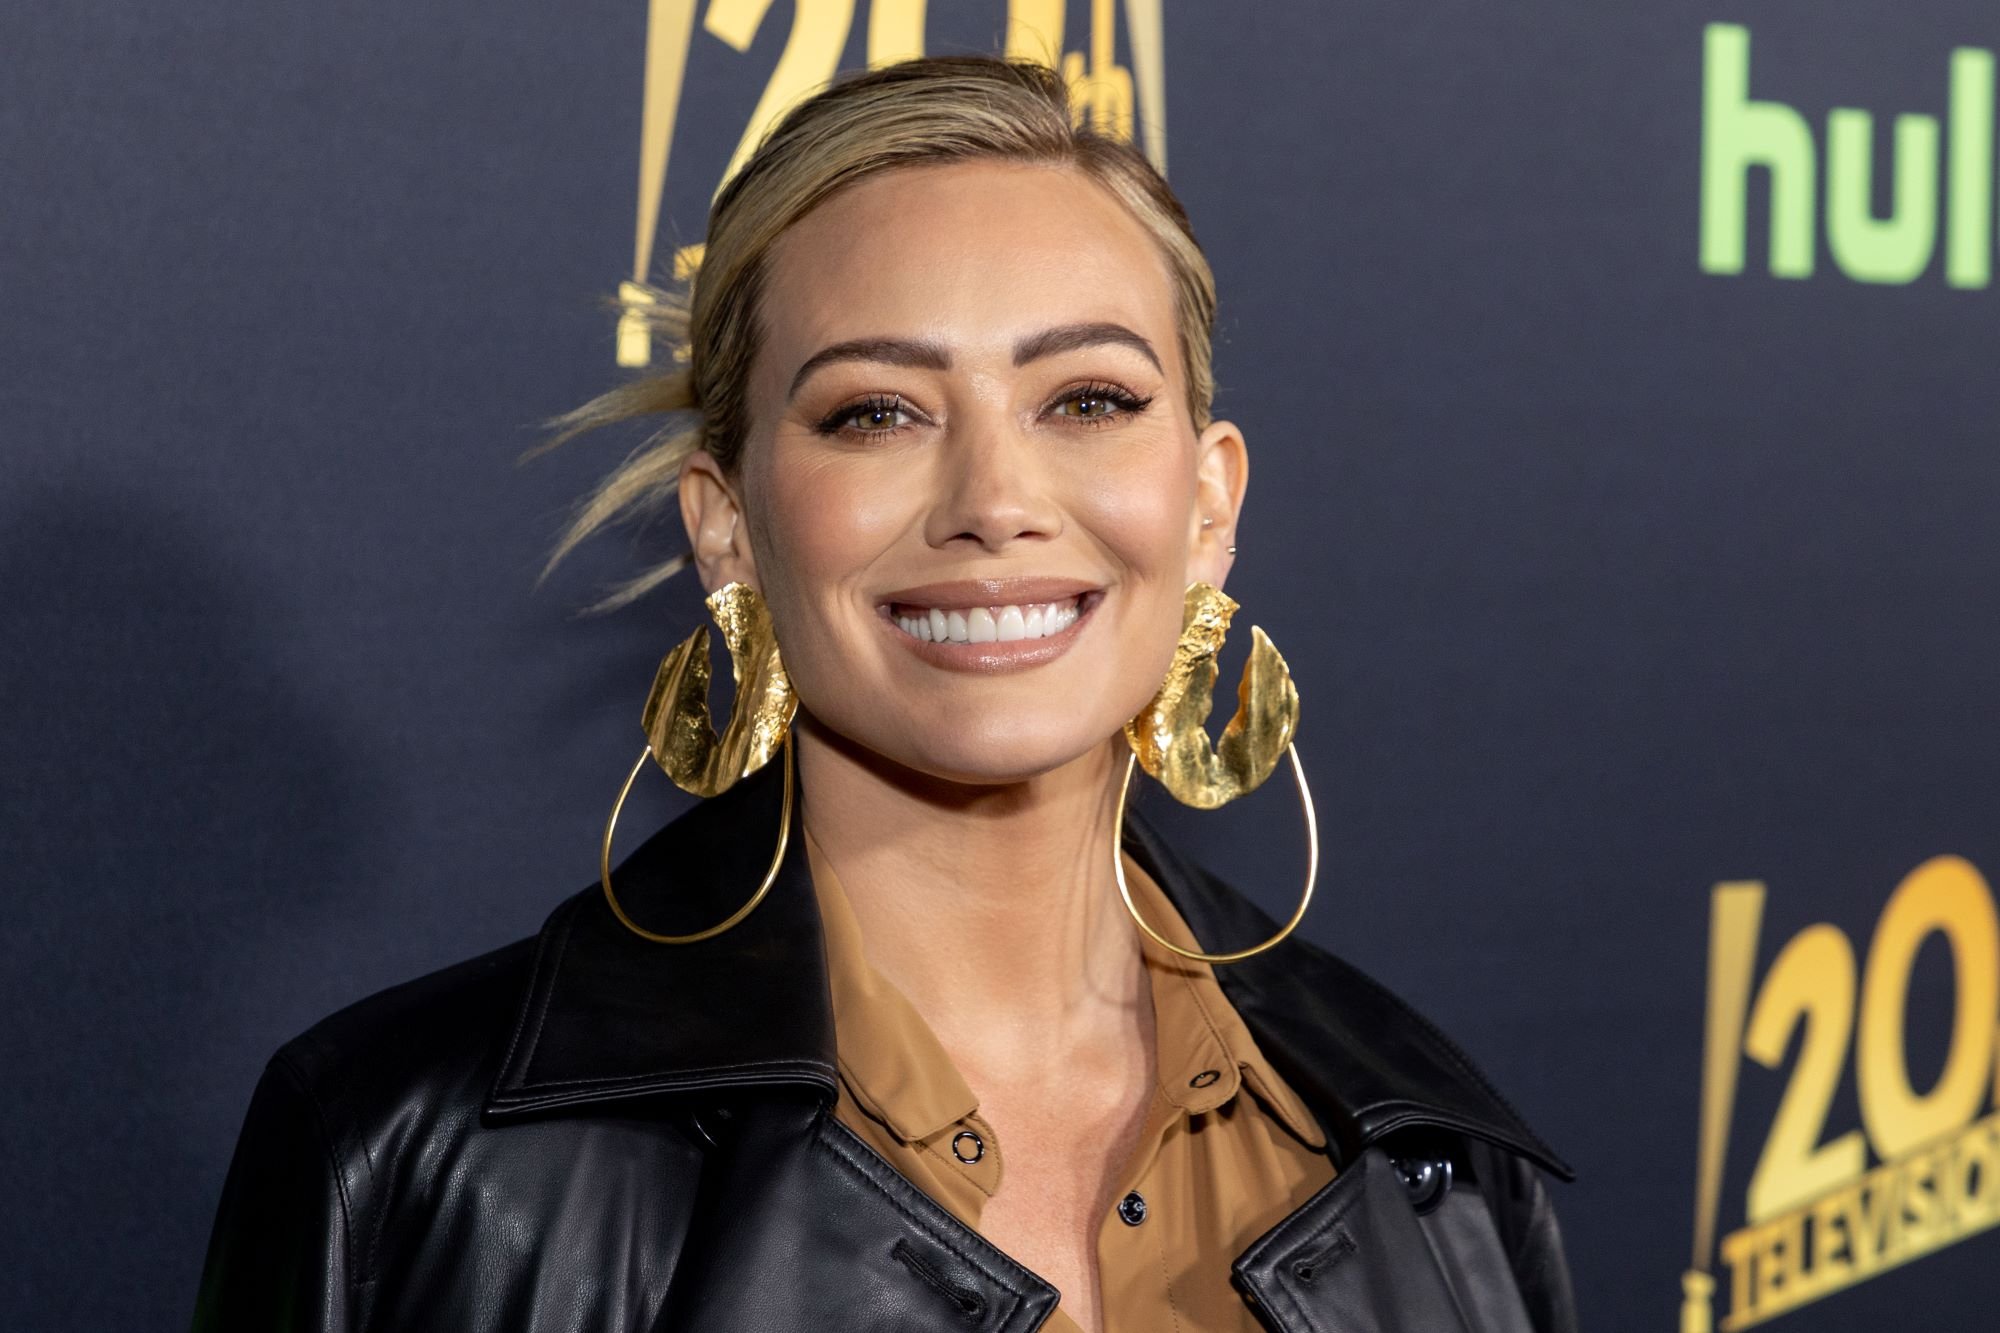 Hilary Duff, who stars in 'How I Met Your Father' Season 2, wears a black leather jacket over a light brown button-up shirt and gold dangly earrings.